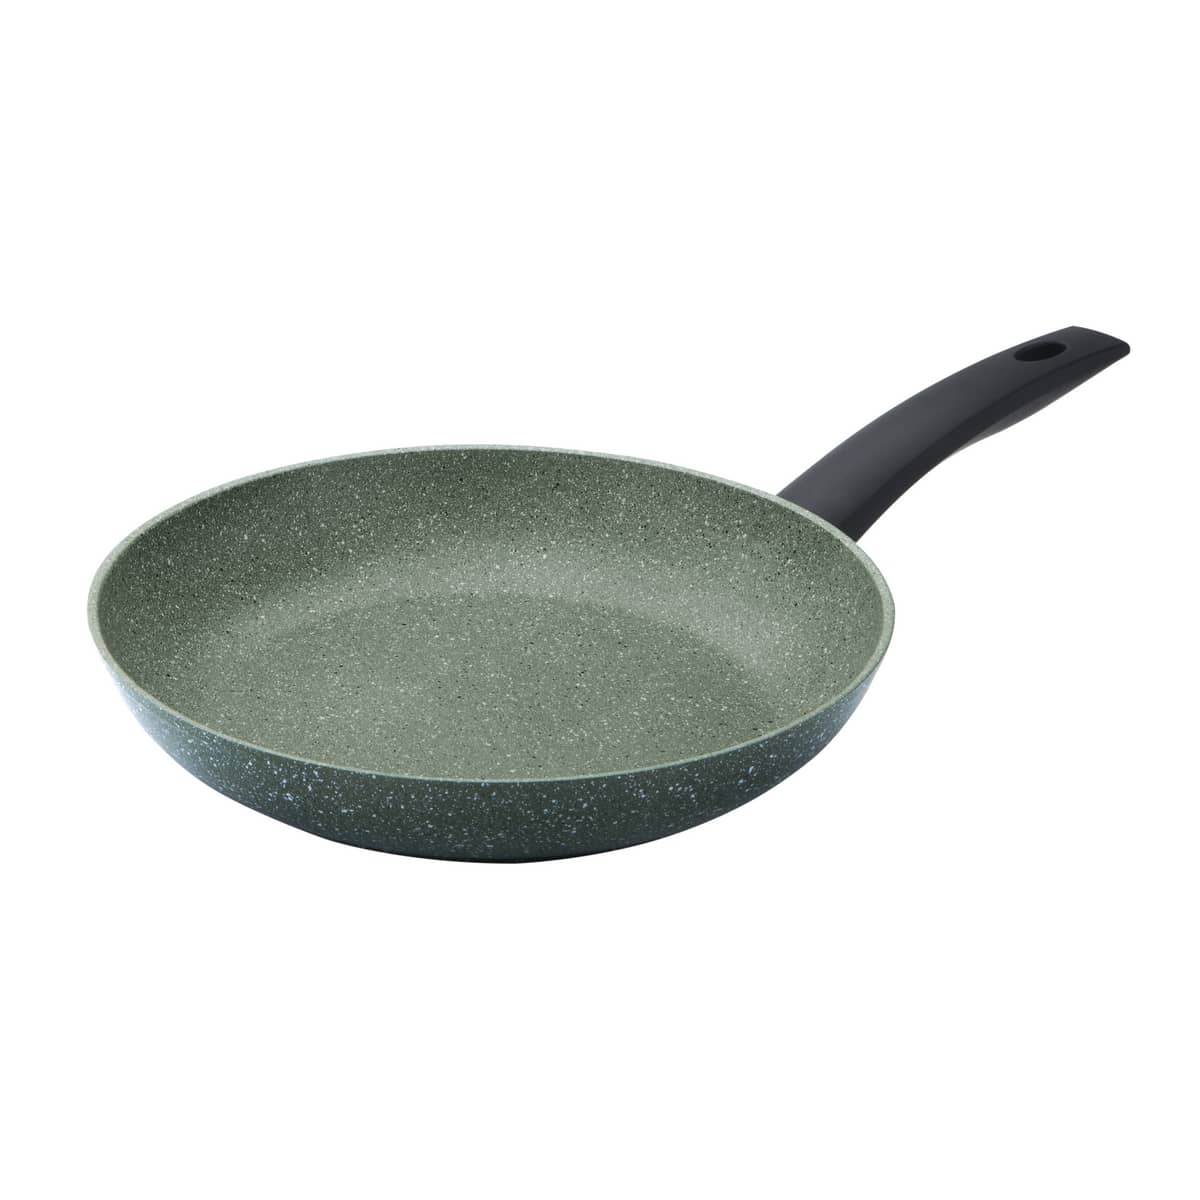 An image of Eco Non-Stick Frying Pan 20cm